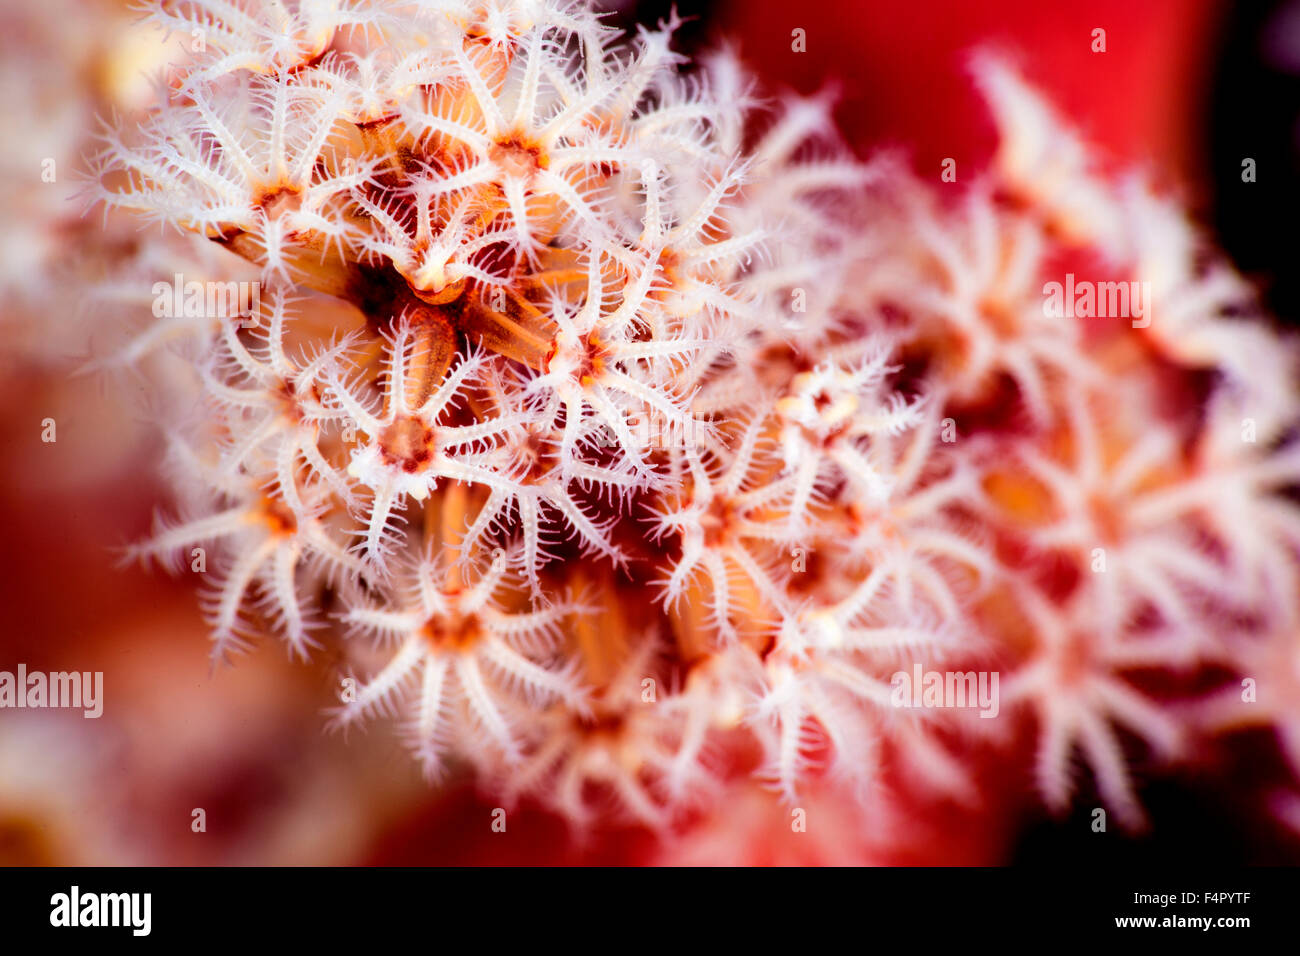 Octocoral or soft coral polyps feeding in Close-up Stock Photo